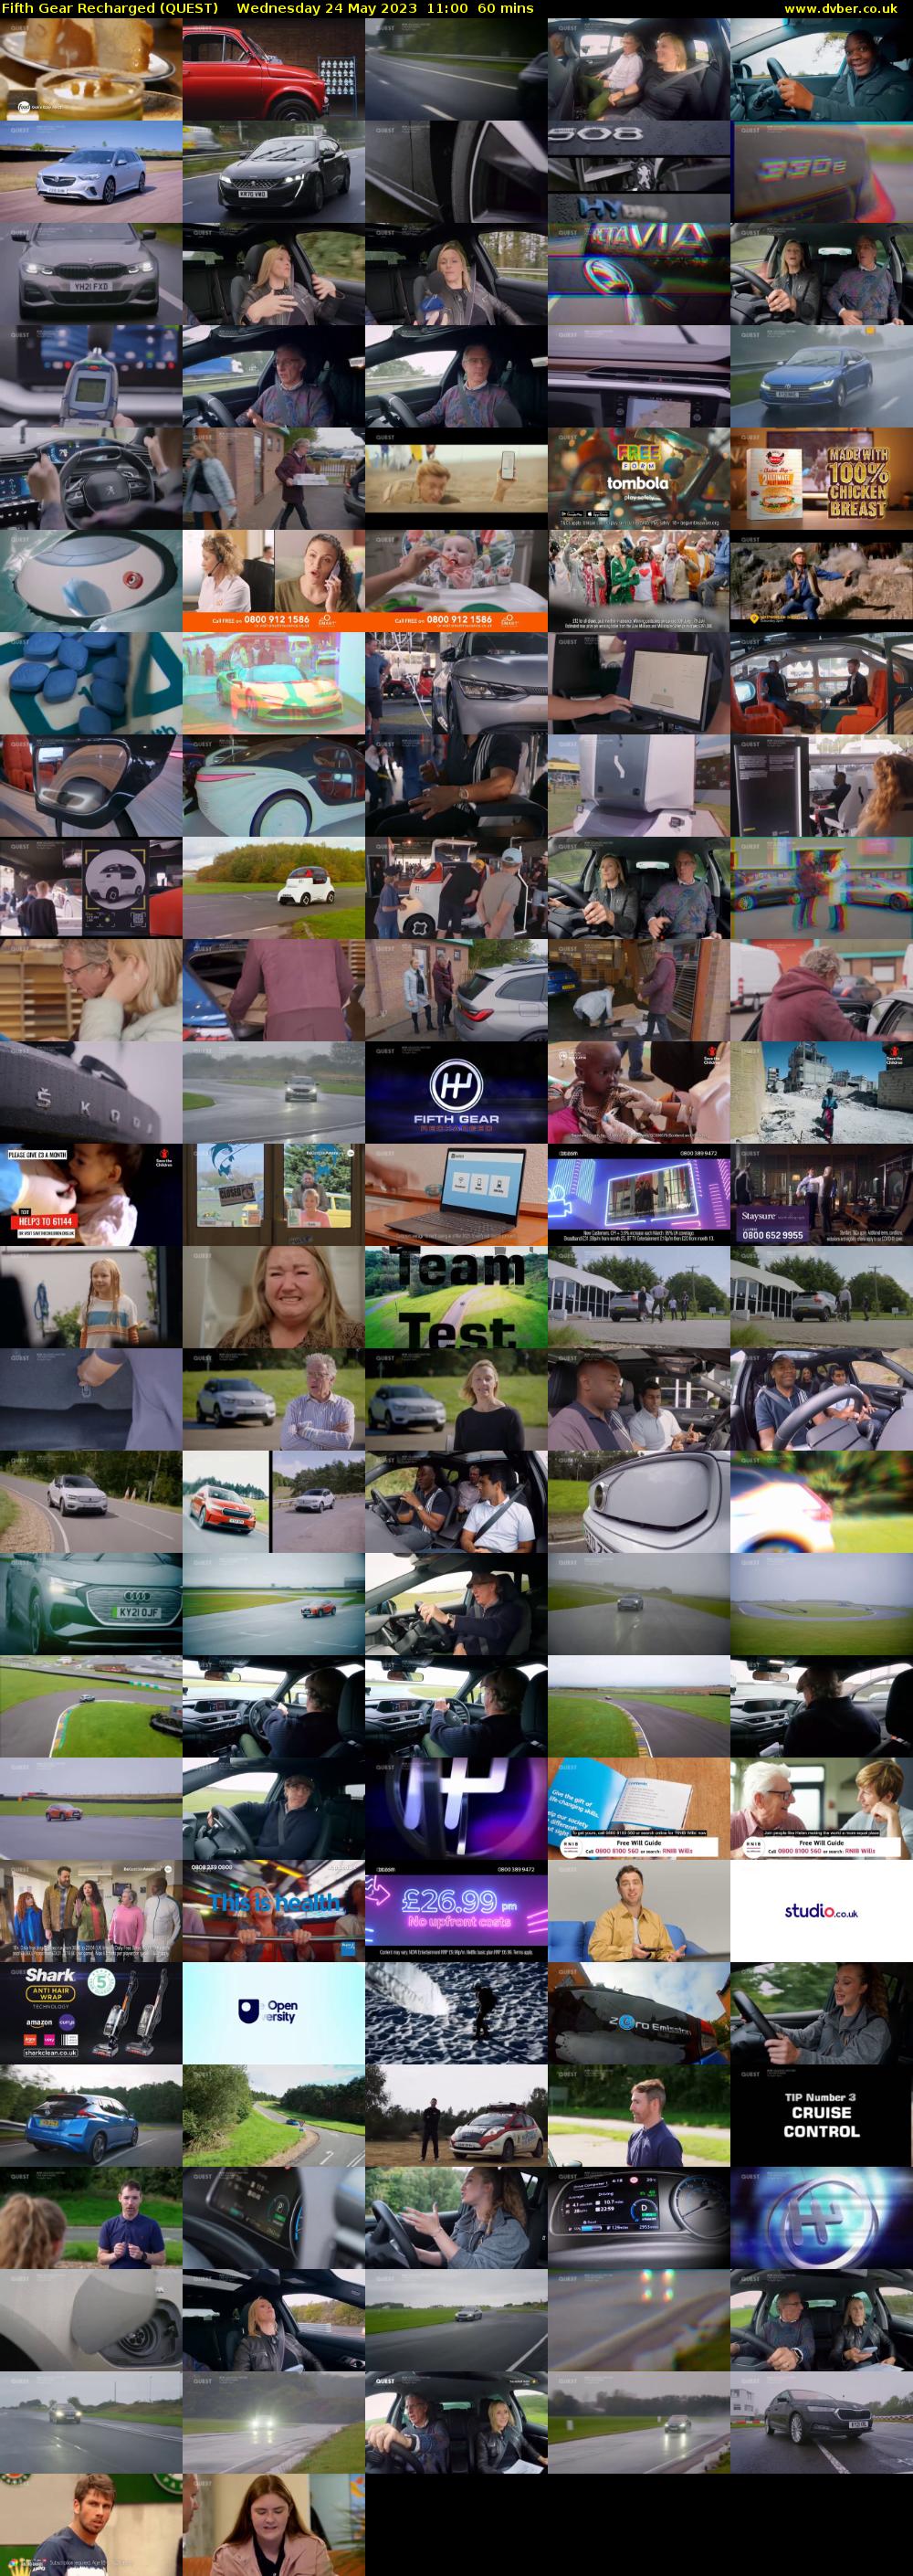 Fifth Gear Recharged (QUEST) Wednesday 24 May 2023 11:00 - 12:00